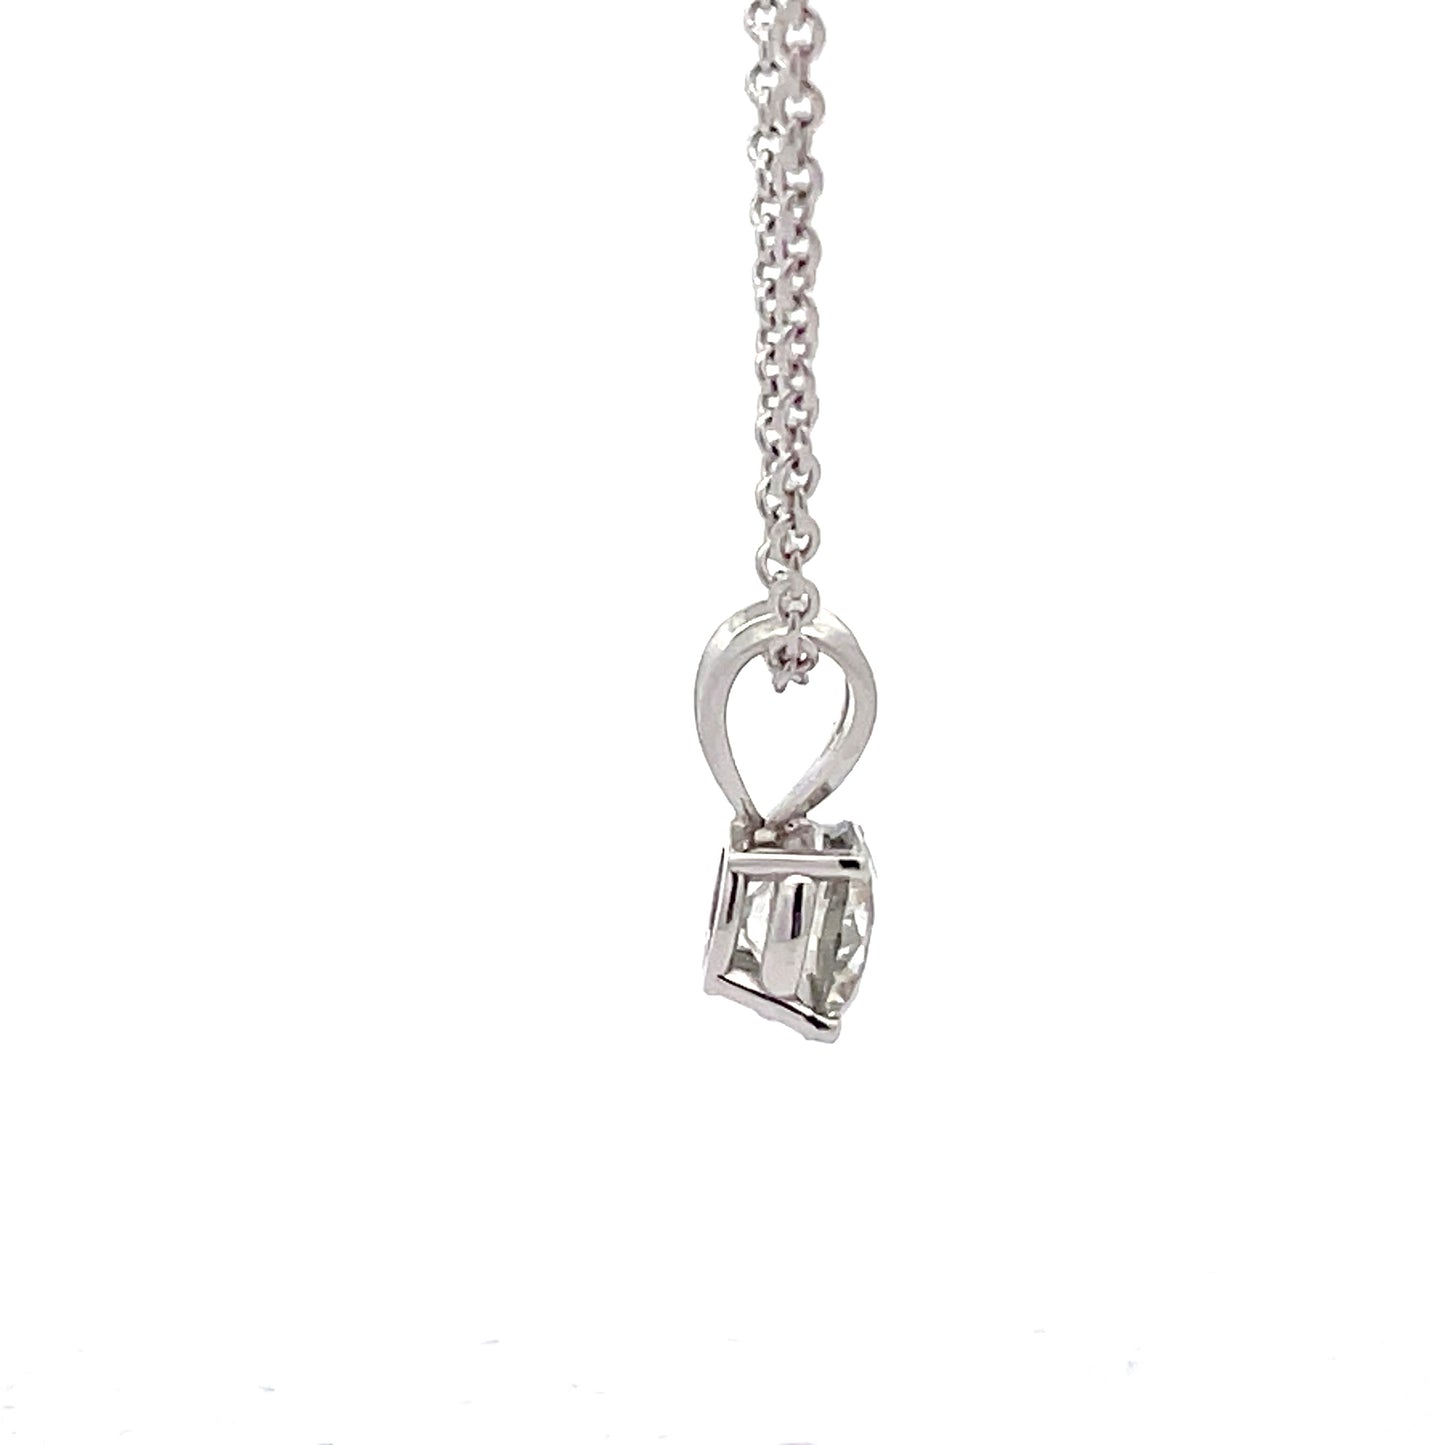 The Solitaire Crown Pendant